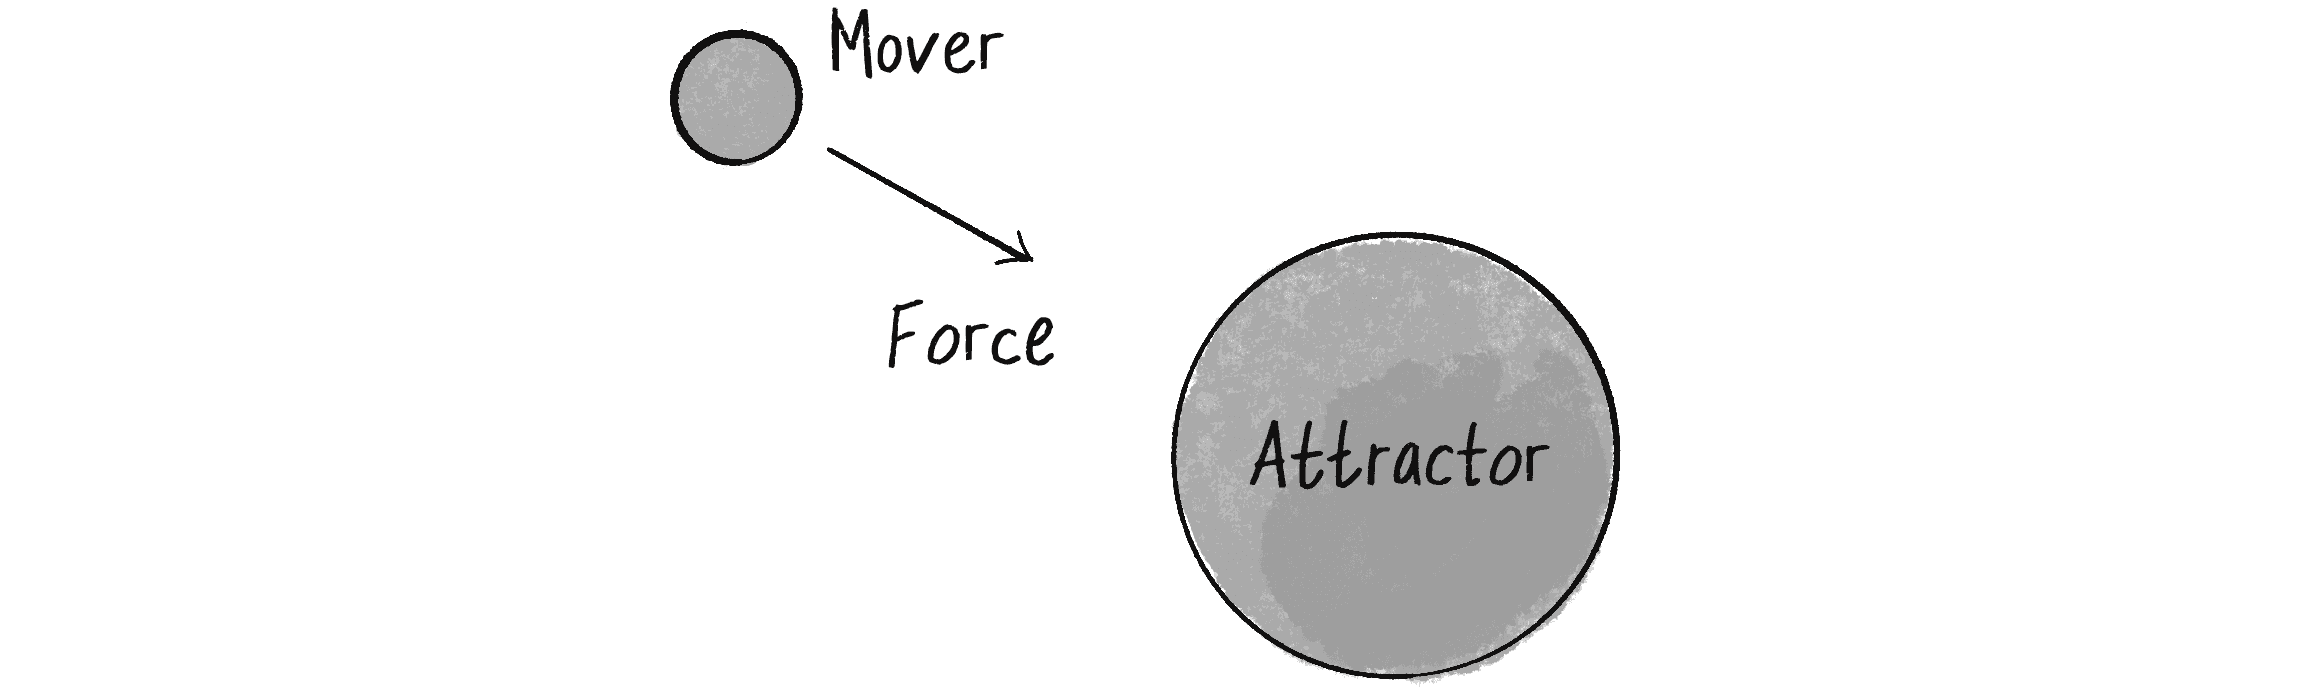 Figure 2.9: One mover and one attractor. The mover experiences a gravitational force toward the attractor.